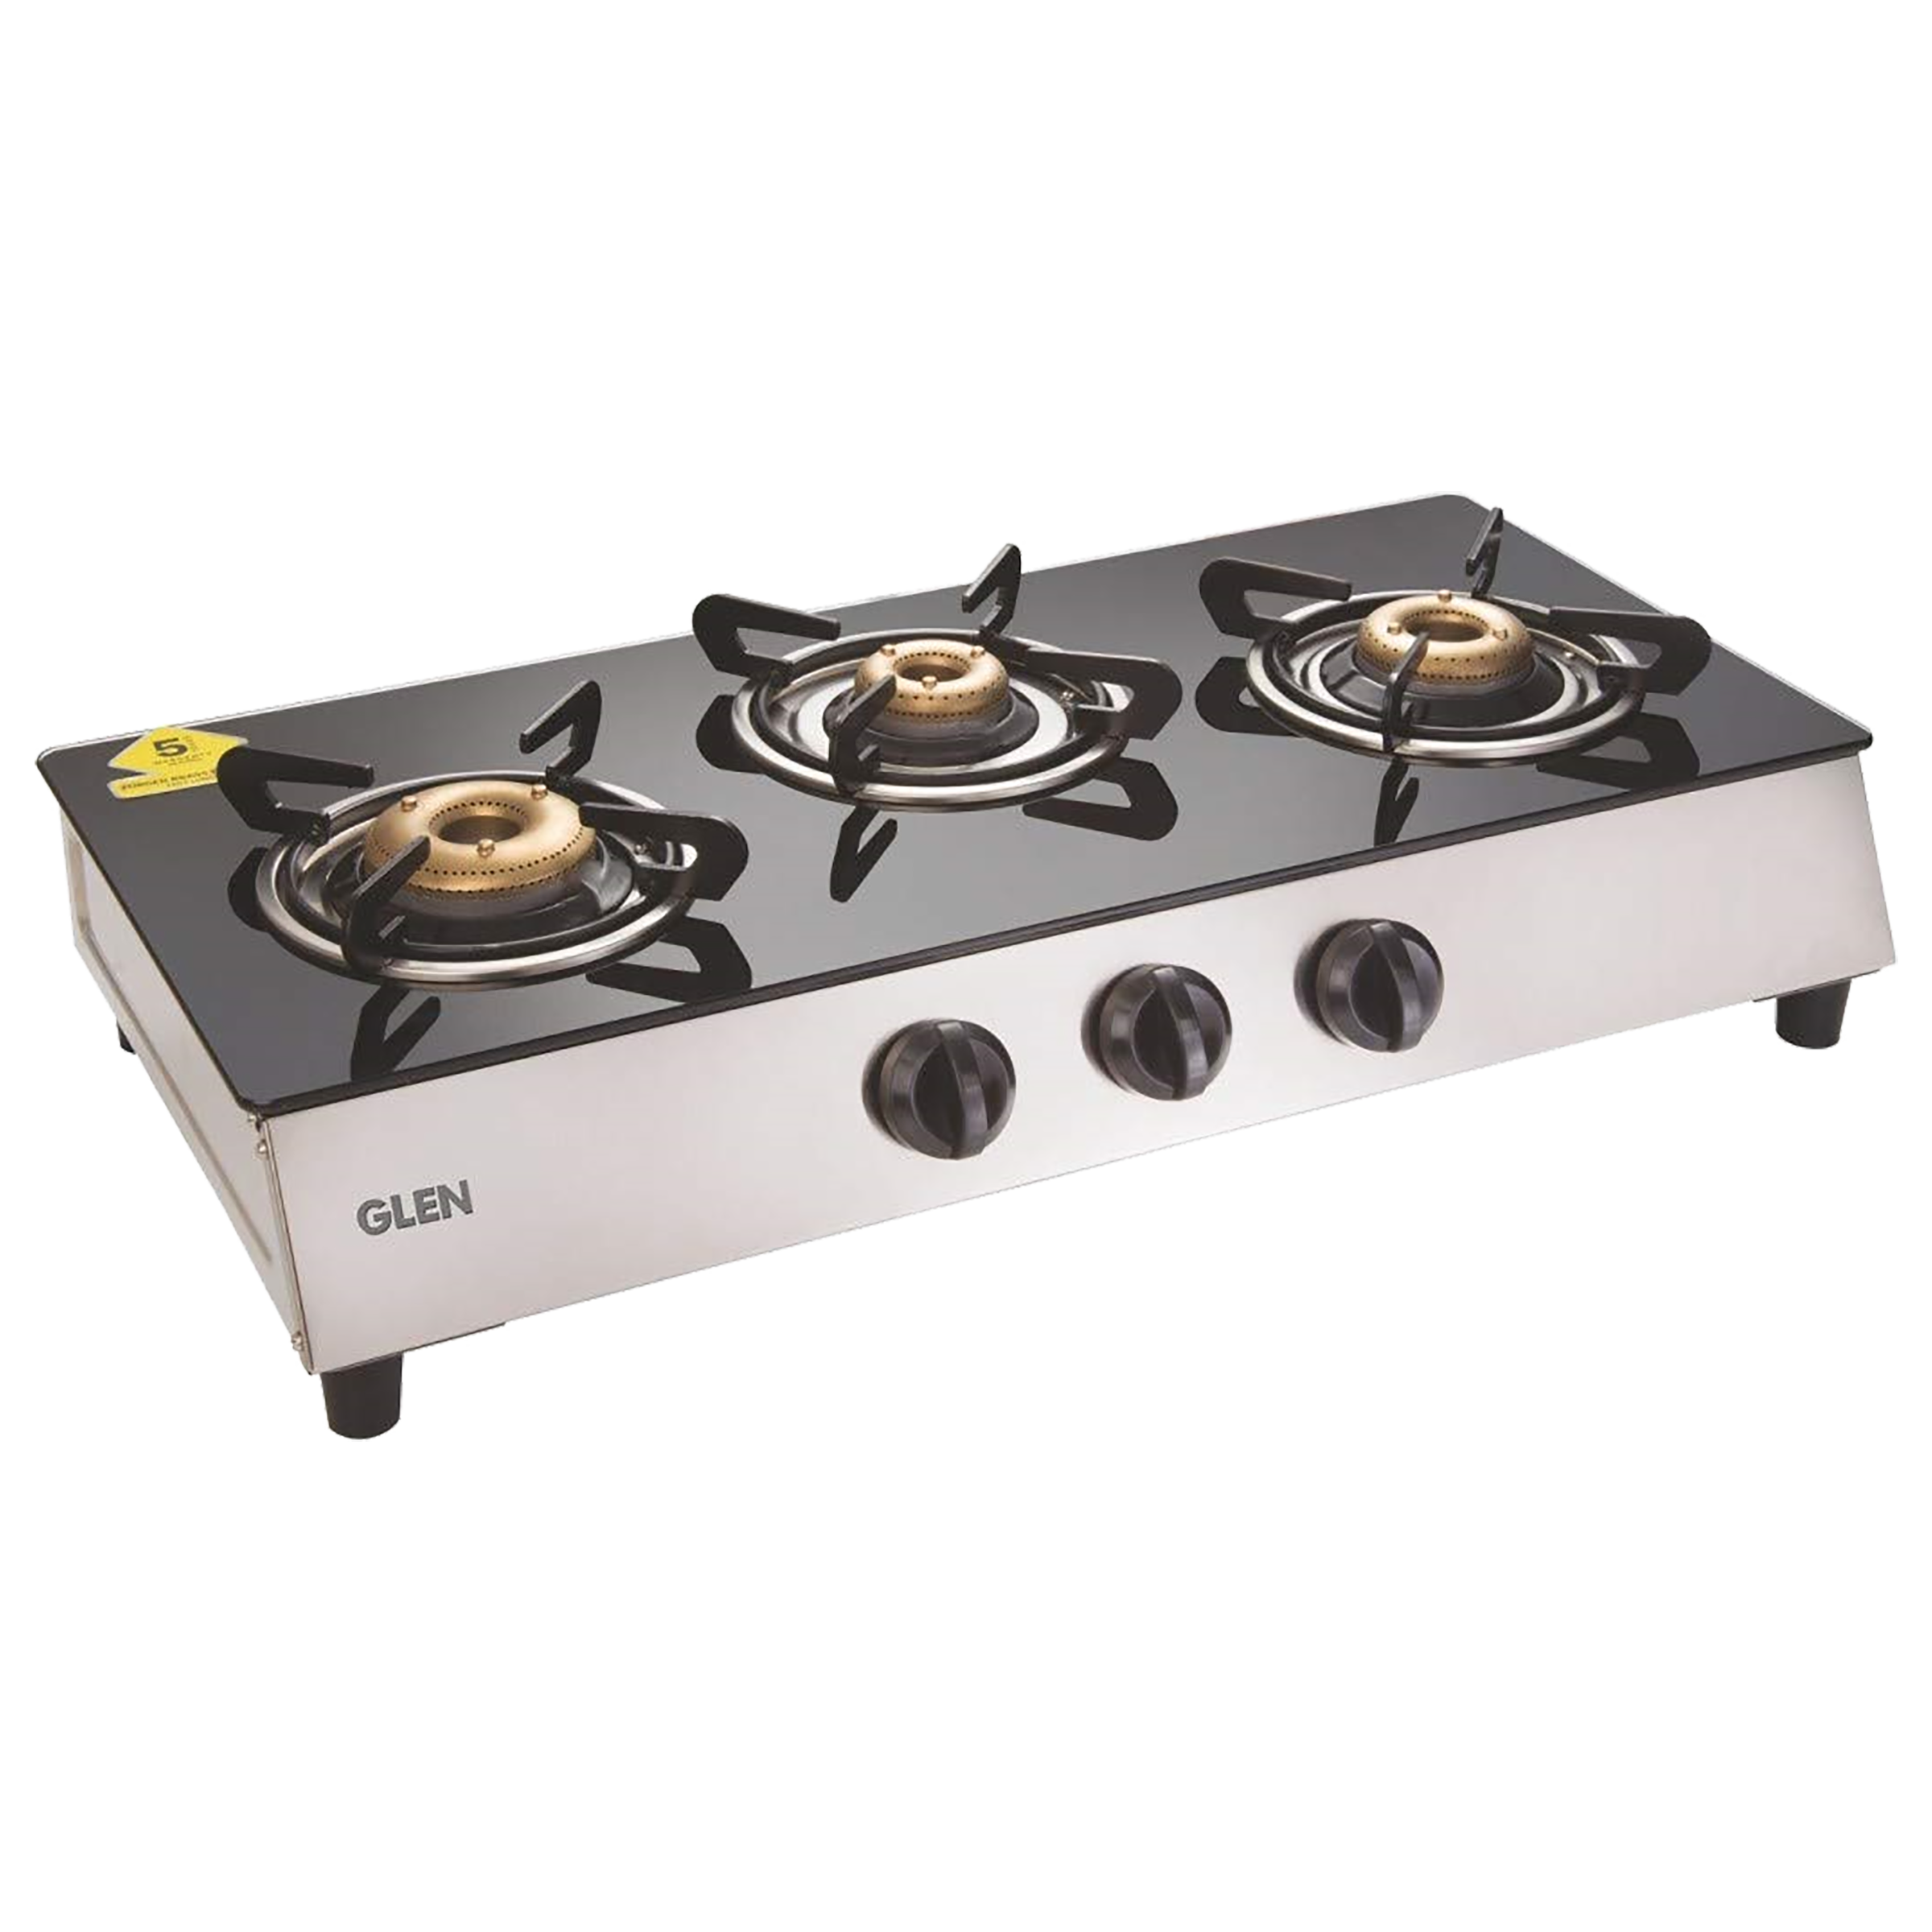 Glen CT1035GT 3 Burner Toughened Glass Top Gas Stove (Sturdy Pan Supports, Black)_1